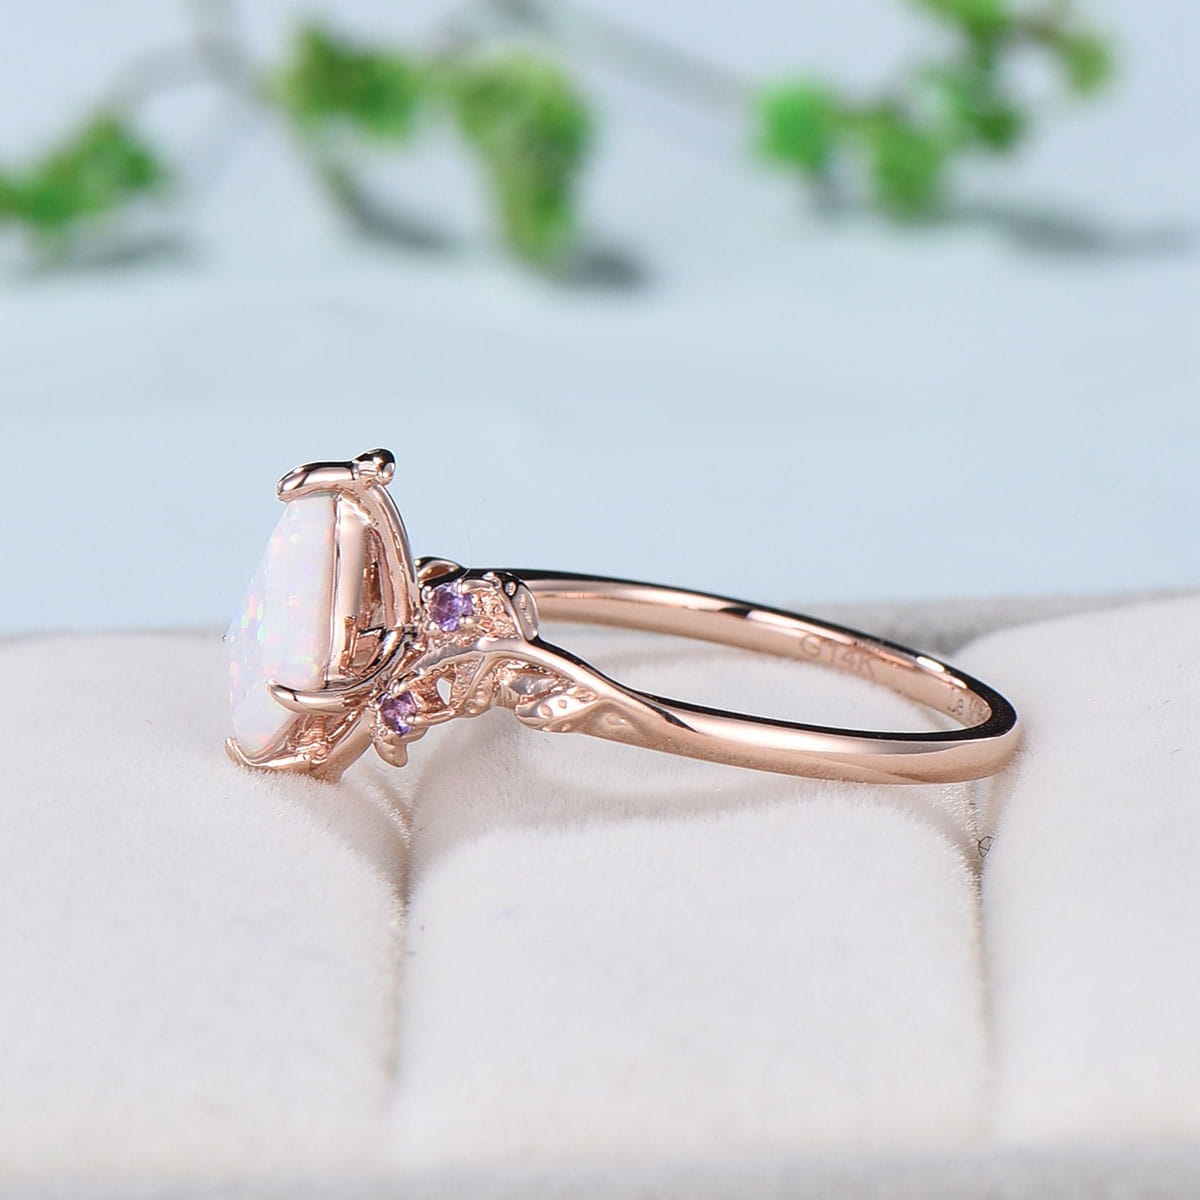 Vintage kite cut opal amethyst engagement ring natural inspired fire opal engagement ring rose gold art deco leaves branch wedding ring - PENFINE